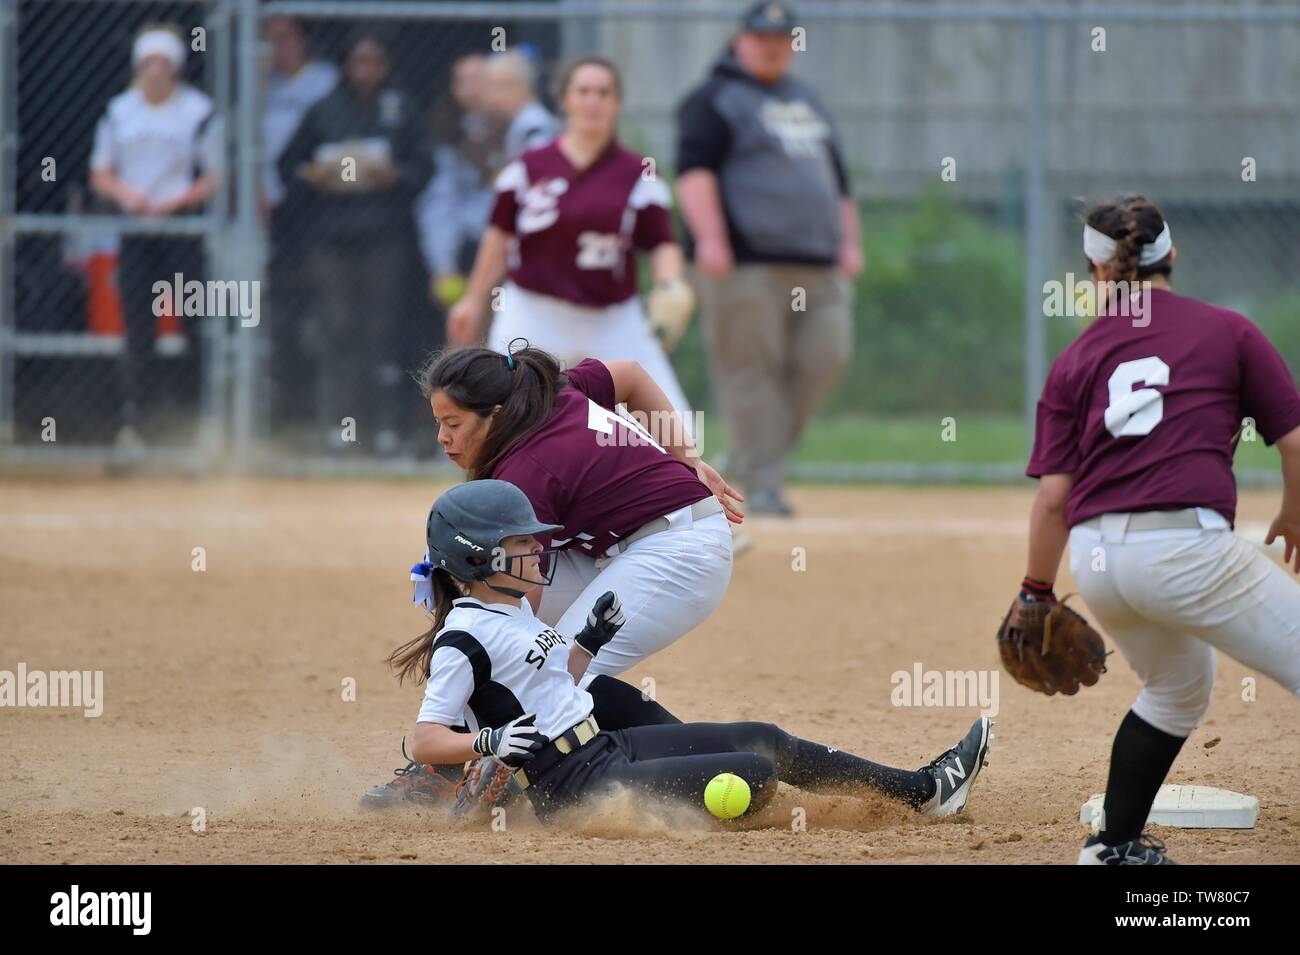 Runner sliding in safely with a steal of second as an opposing infielder has the ball come loose will attempting to apply a tag. USA. Stock Photo